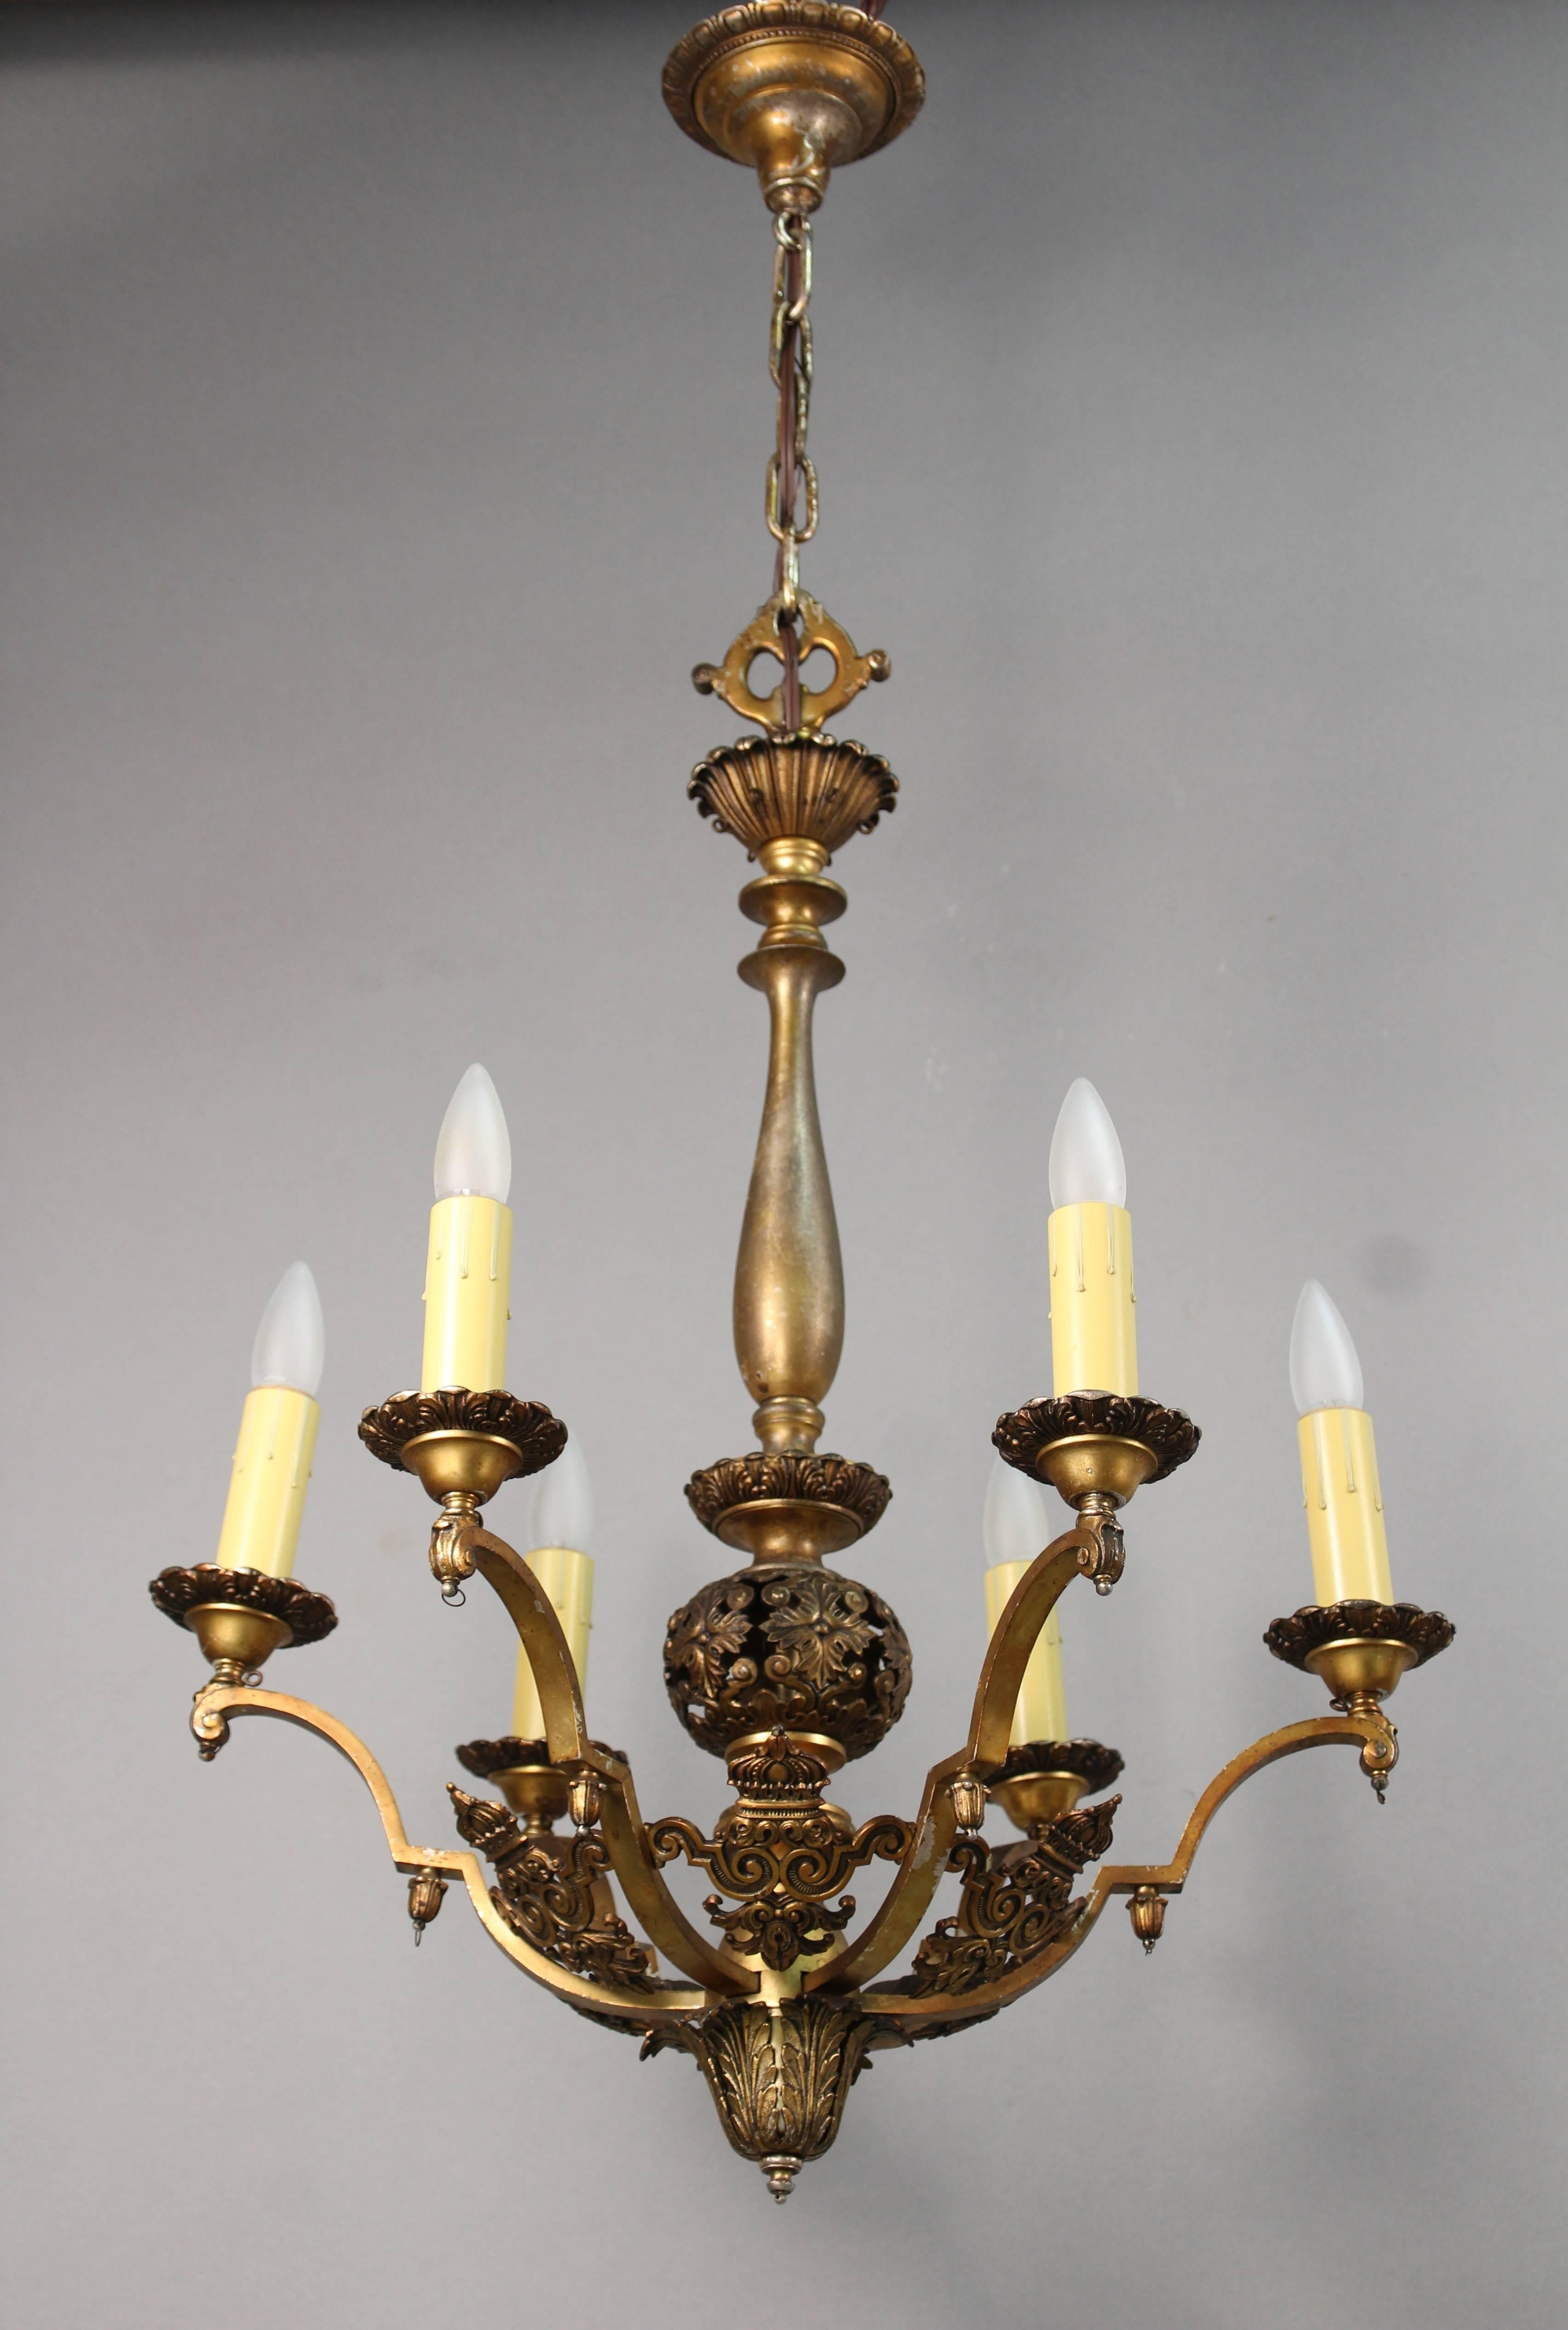 Elegant six-light chandelier with a tall profile. Intricate casting, circa 1920s. Measures: 31